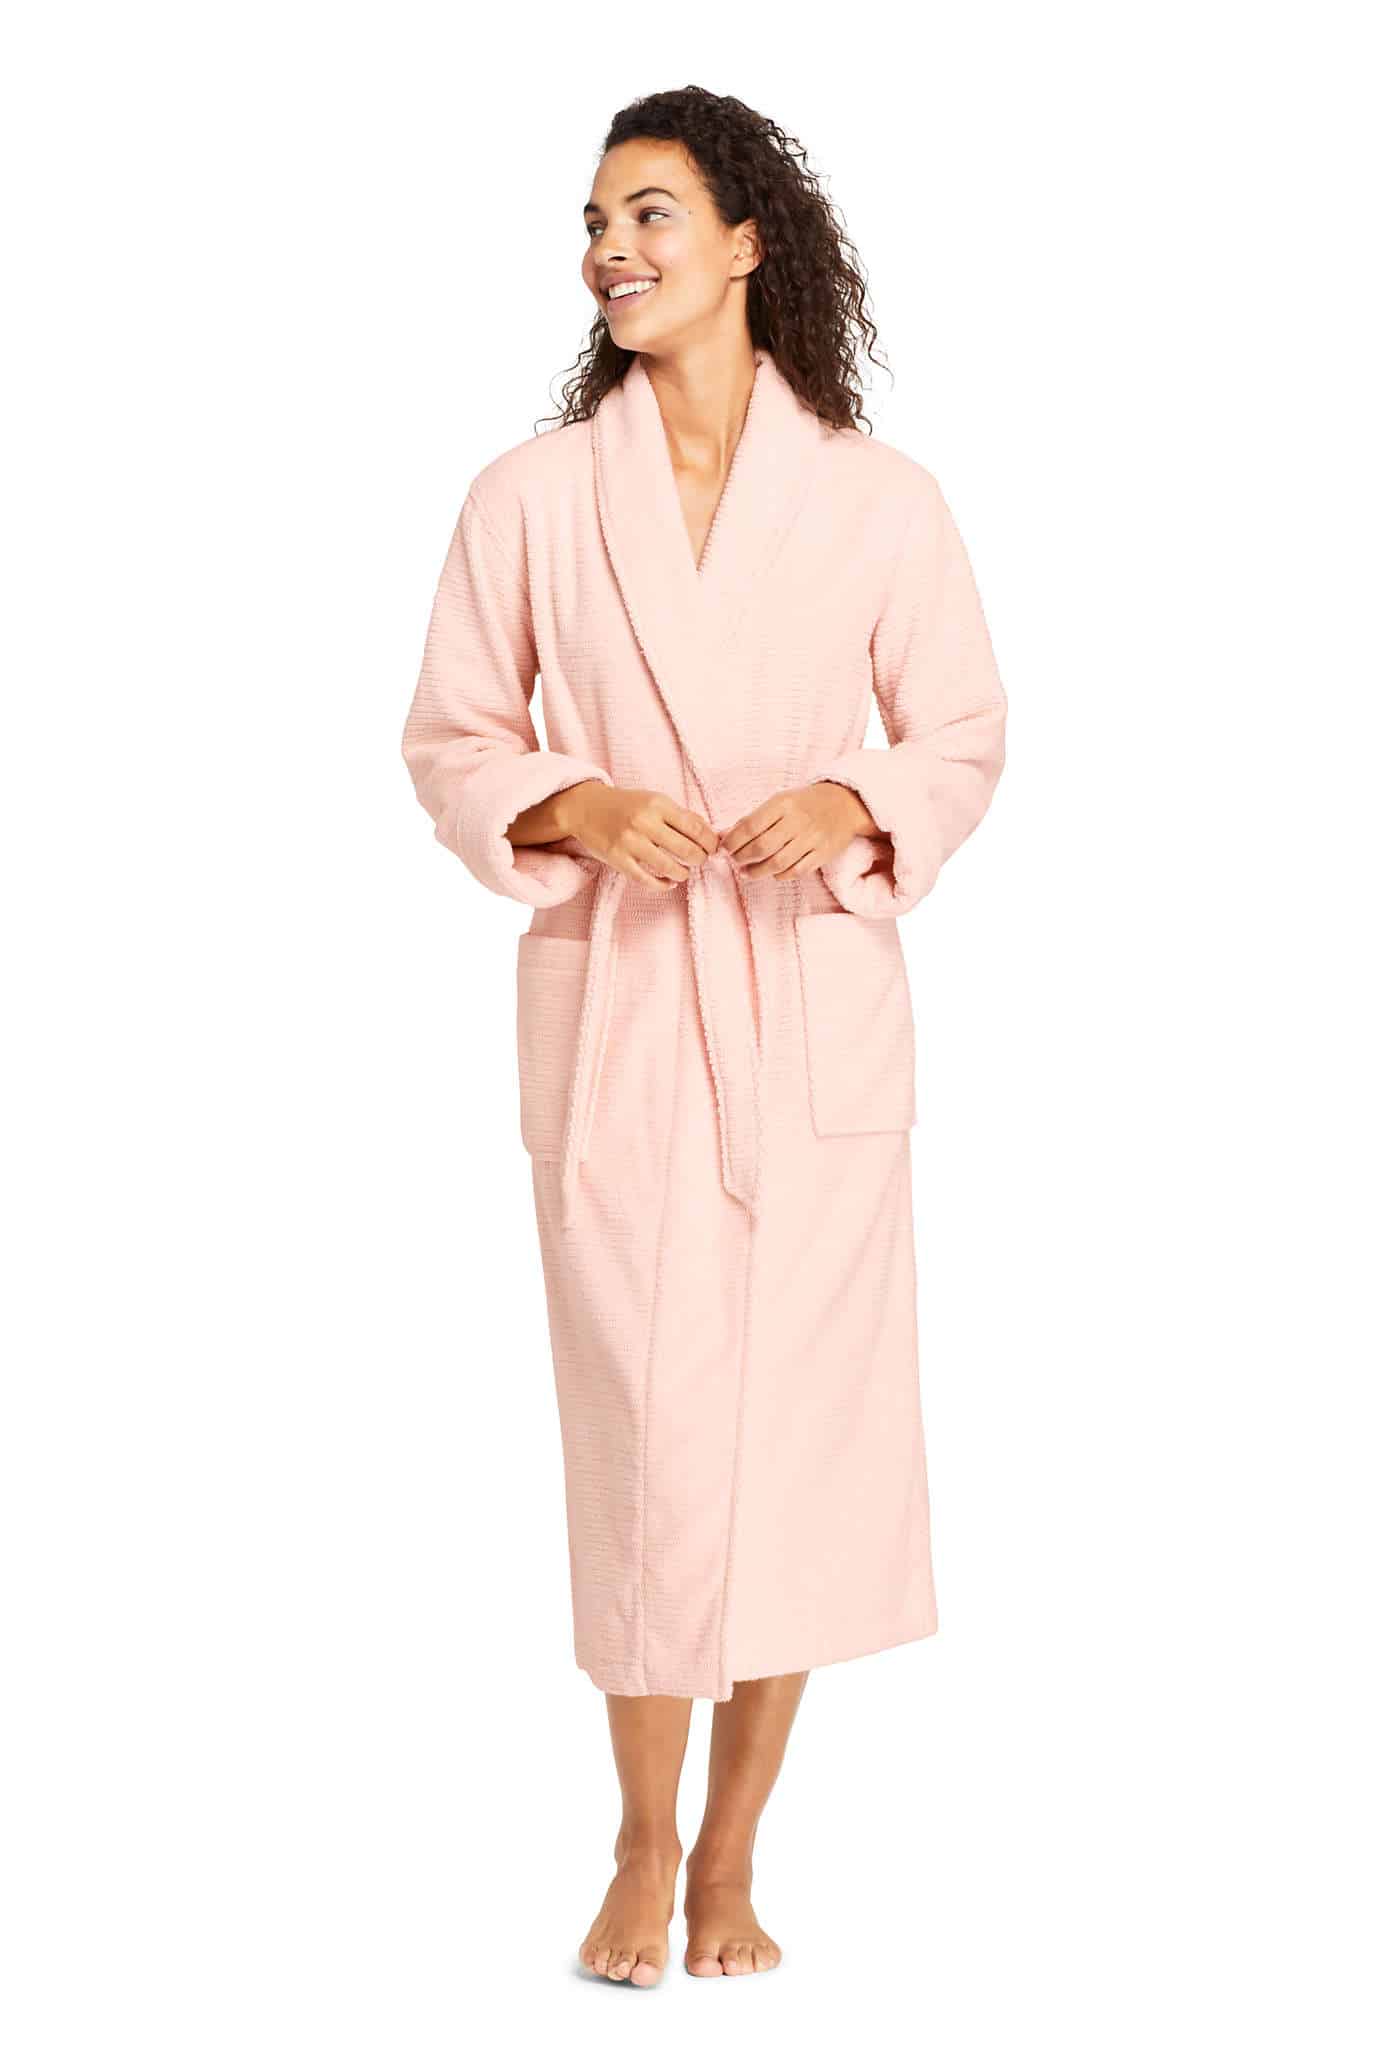 Most Comfortable Terry Cloth Robes for Women | ComfortNerd